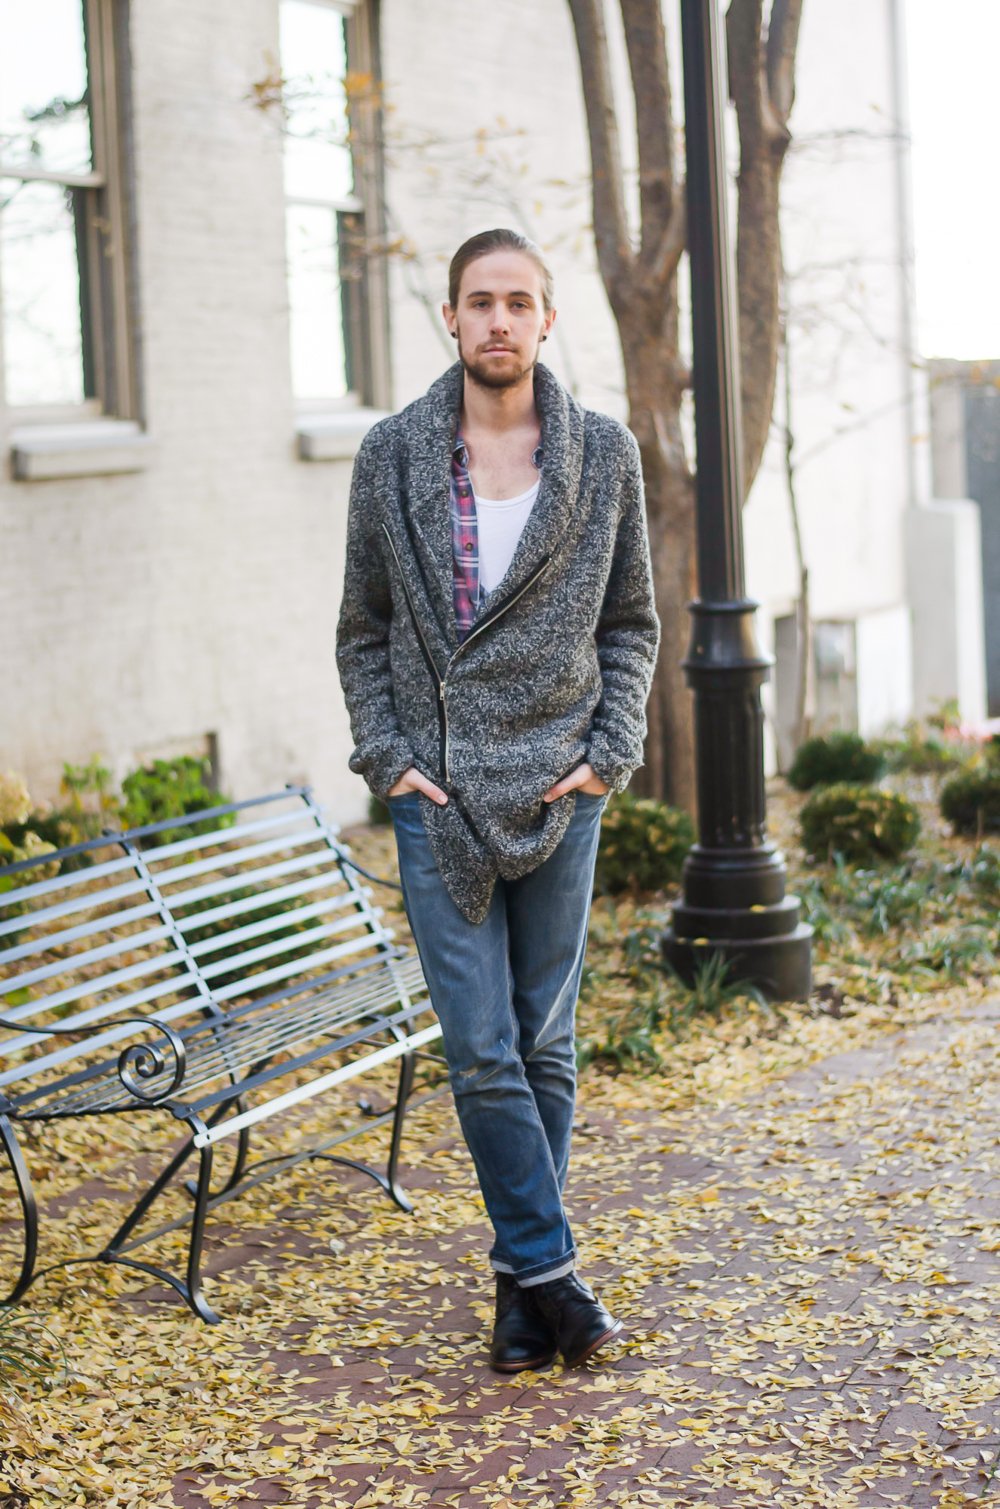 The Kentucky Gent, a Louisville, Kentucky life and style blogger, in H&M Sweater, Colorfast Plaid Shirt, Levi's 511 jeans, Richer Poorer Socks, and Trask Union Boots. 